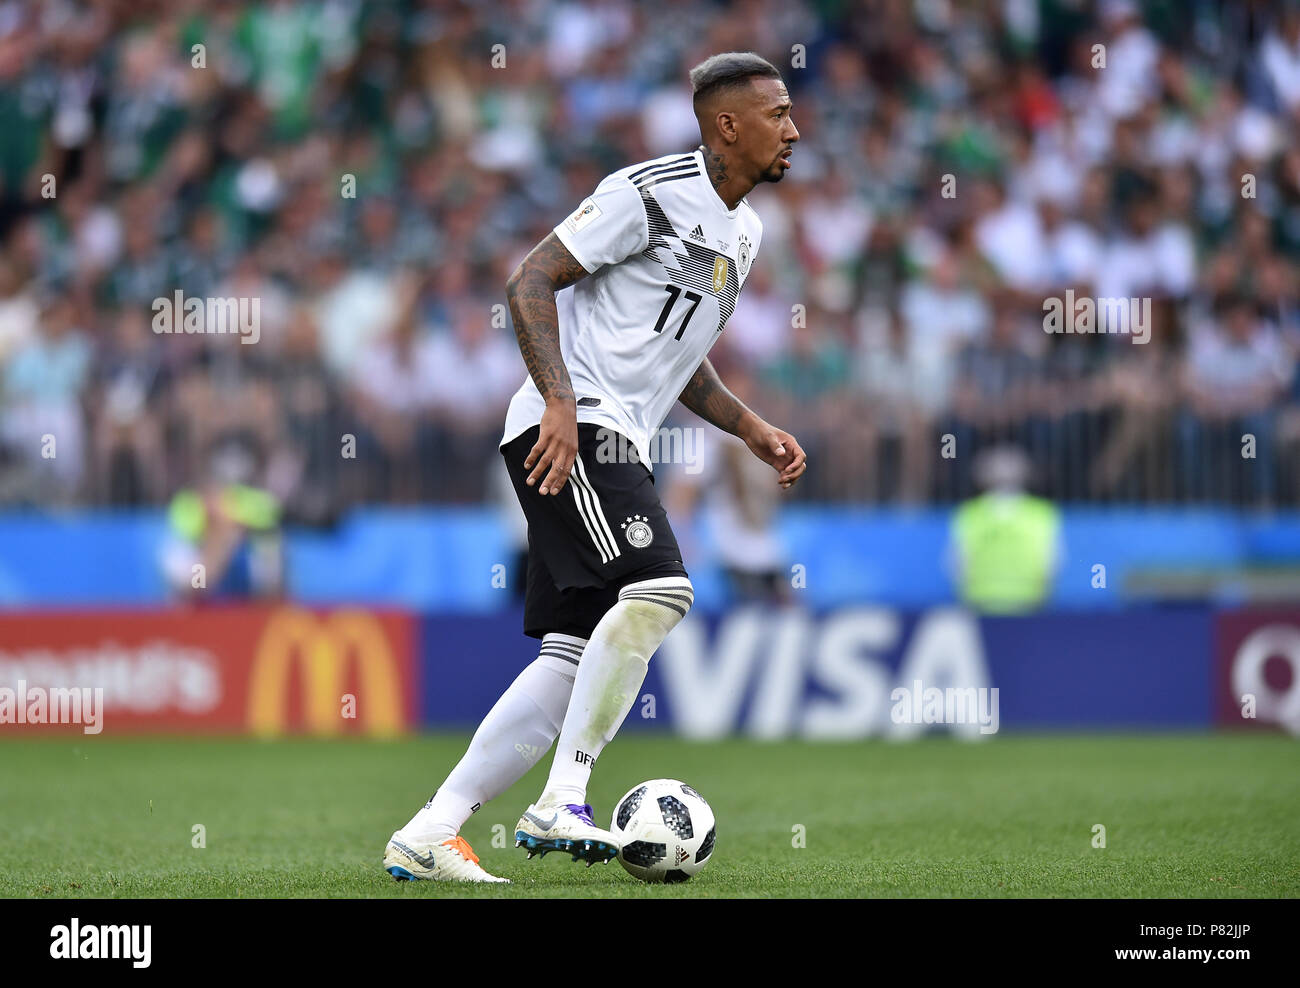 MOSCOW, RUSSIA - JUNE 17: Jerome Boateng of Germany in action during the 2018 FIFA World Cup Russia group F match between Germany and Mexico at Luzhniki Stadium on June 17, 2018 in Moscow, Russia. (Photo by Lukasz Laskowski/PressFocus/MB Media) Stock Photo